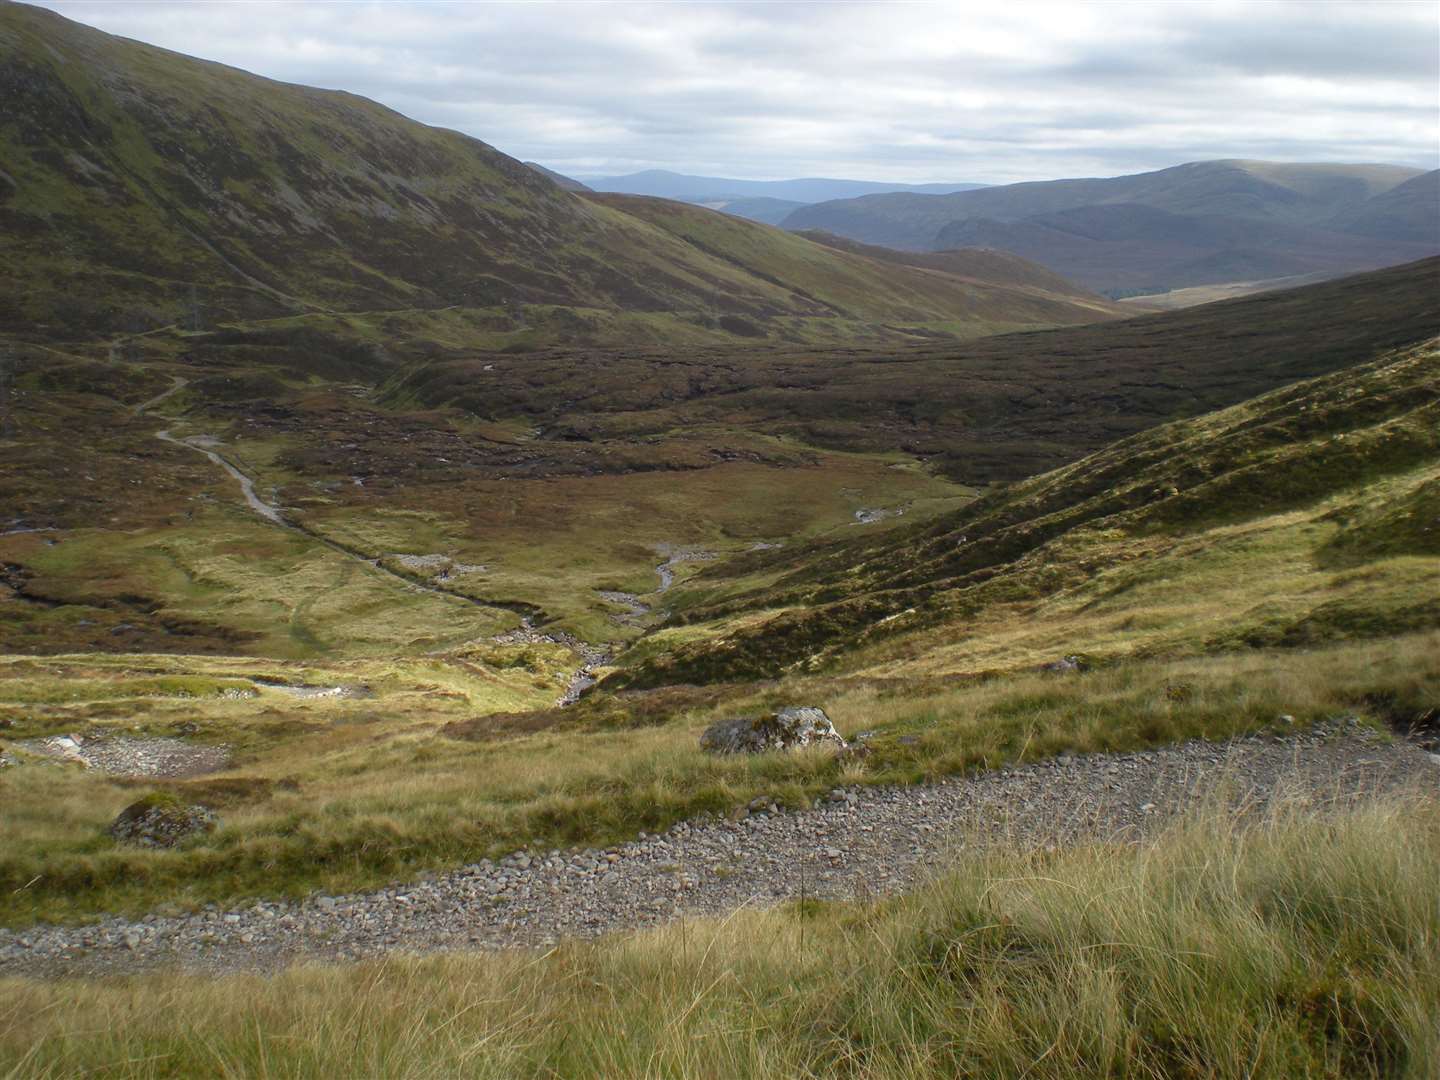 Looking south-east from the zigzags near the top of the Corrieyairack Pass on General Wade's Military Road.